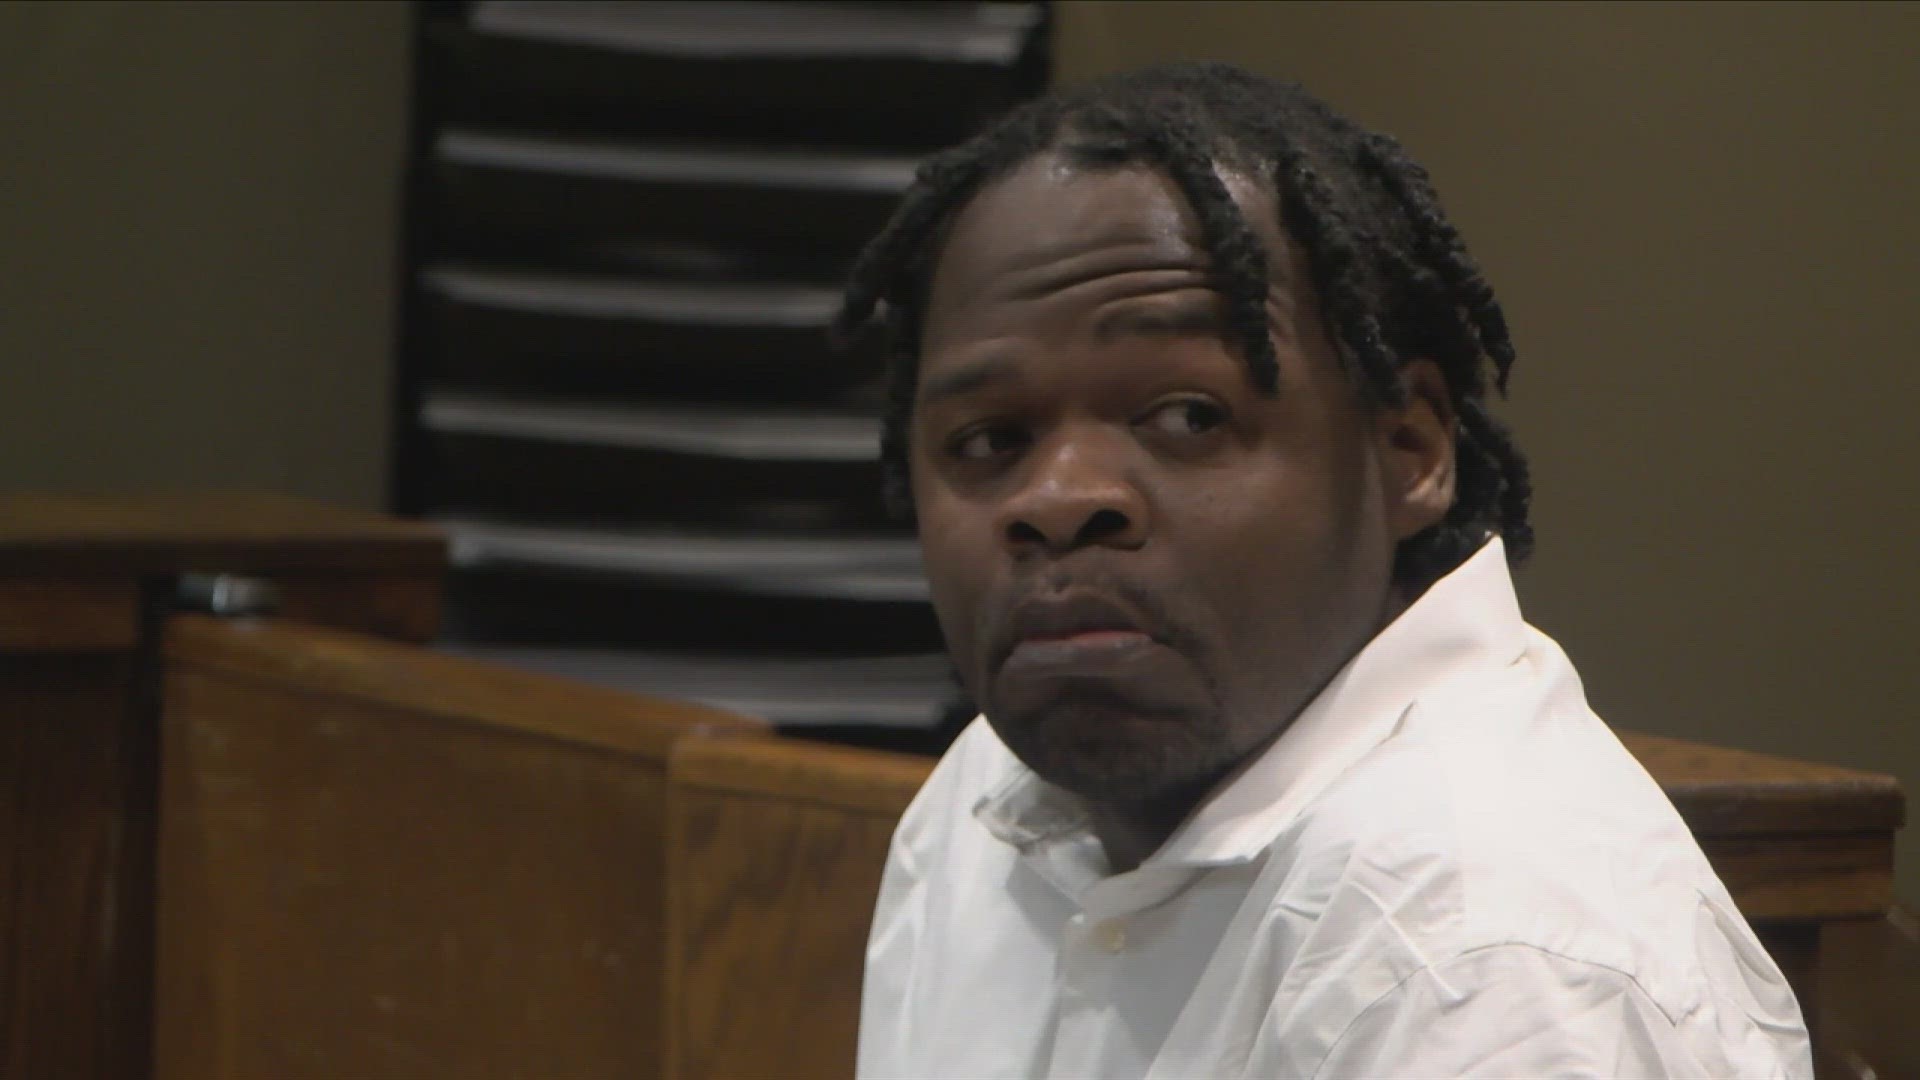 The prosecution has already rested in the trial of Cleotha Abston, the man accused of raping Alicia Franklin in 2021.